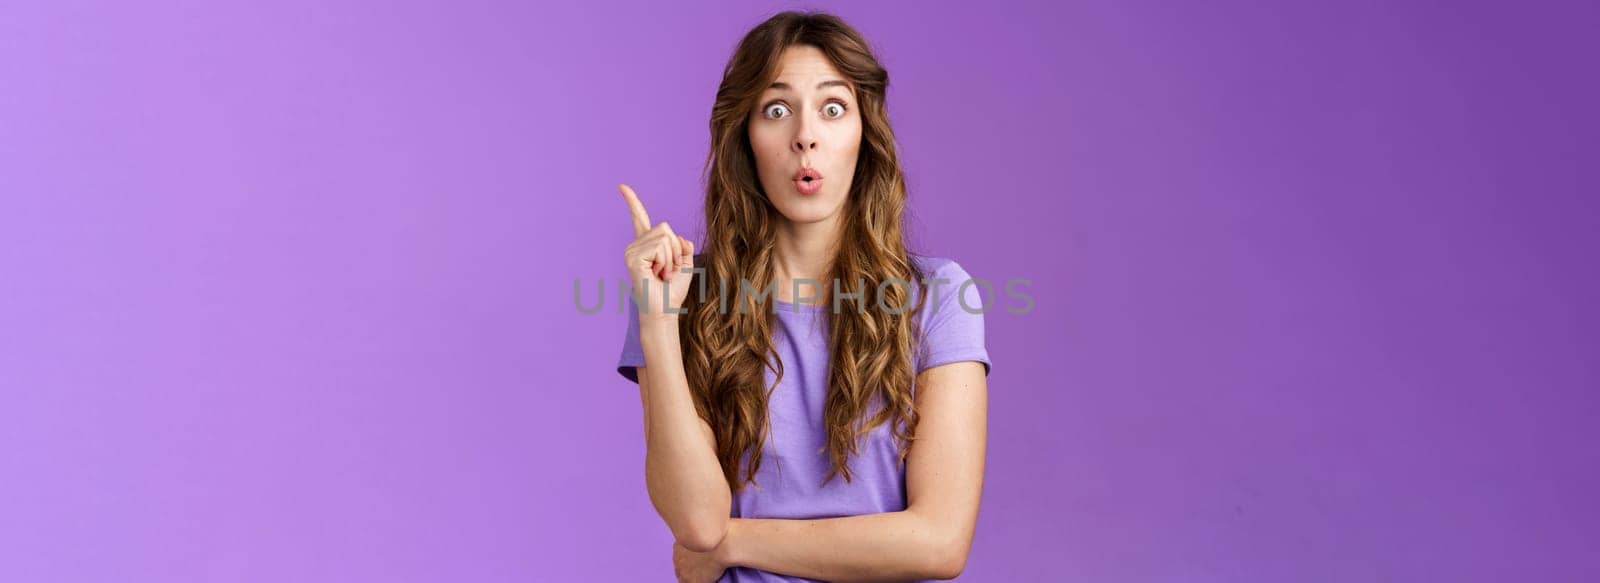 Got it eureka. Excited enthusiastic creative cute european girl raise index finger folding lips wow great found solution suggest perfect plan stand purple background thrilled give good advice.